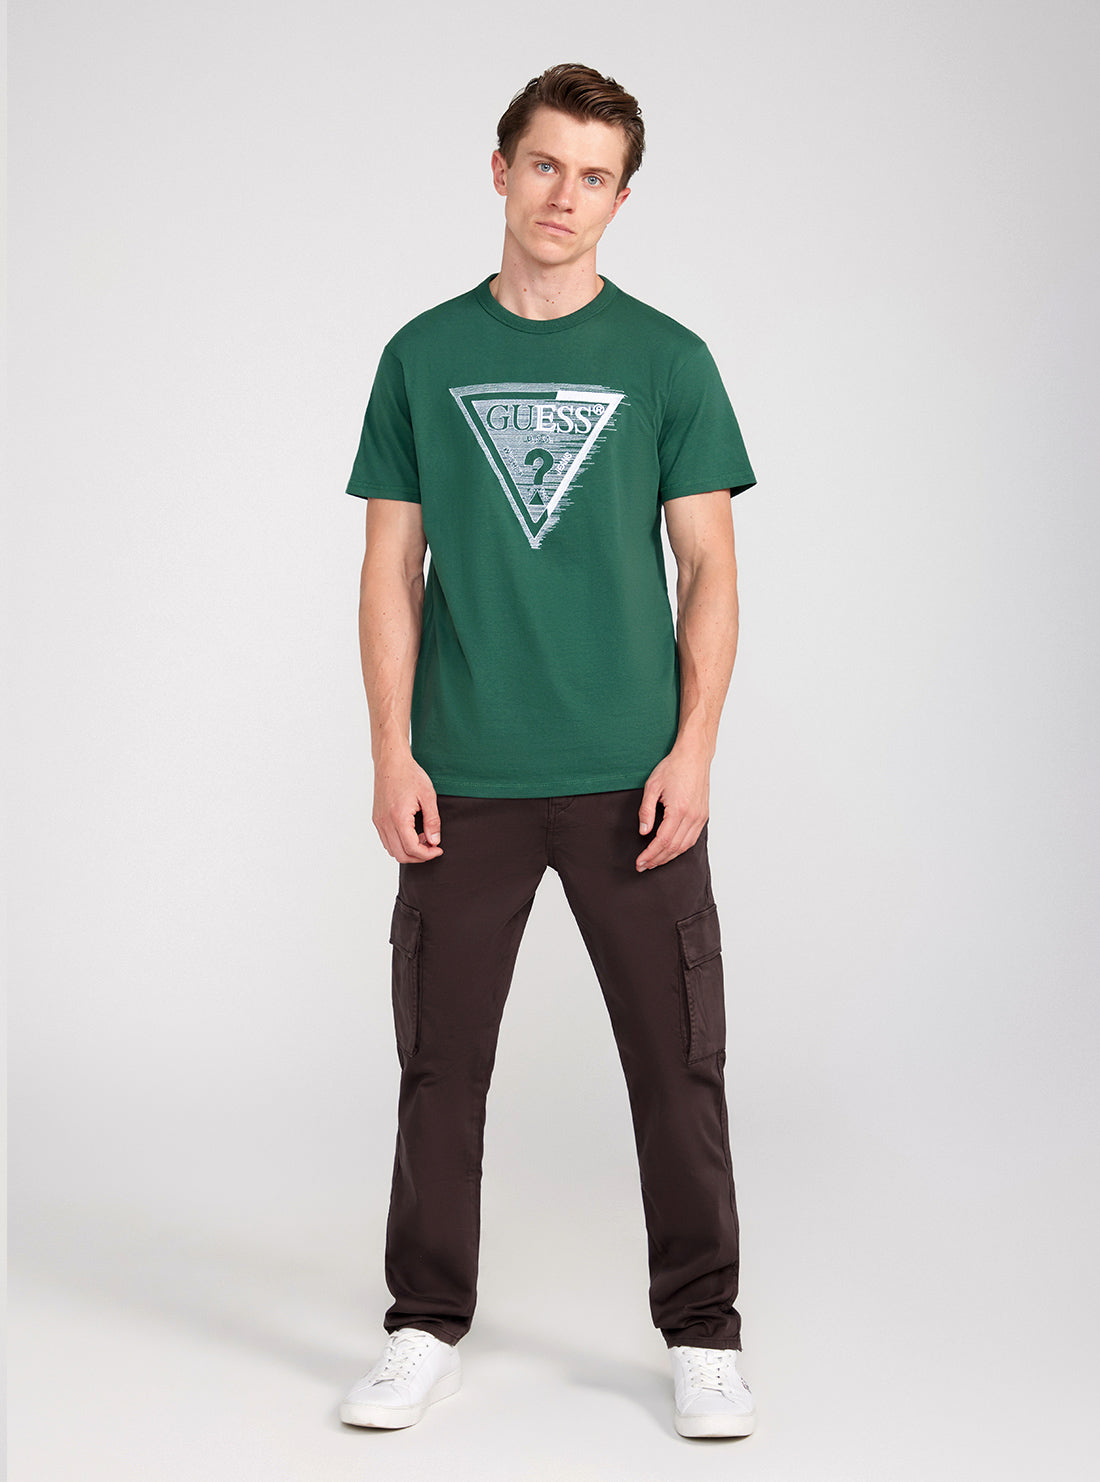 GUESS Green Short Sleeve Shaded Triangle T-Shirt full view